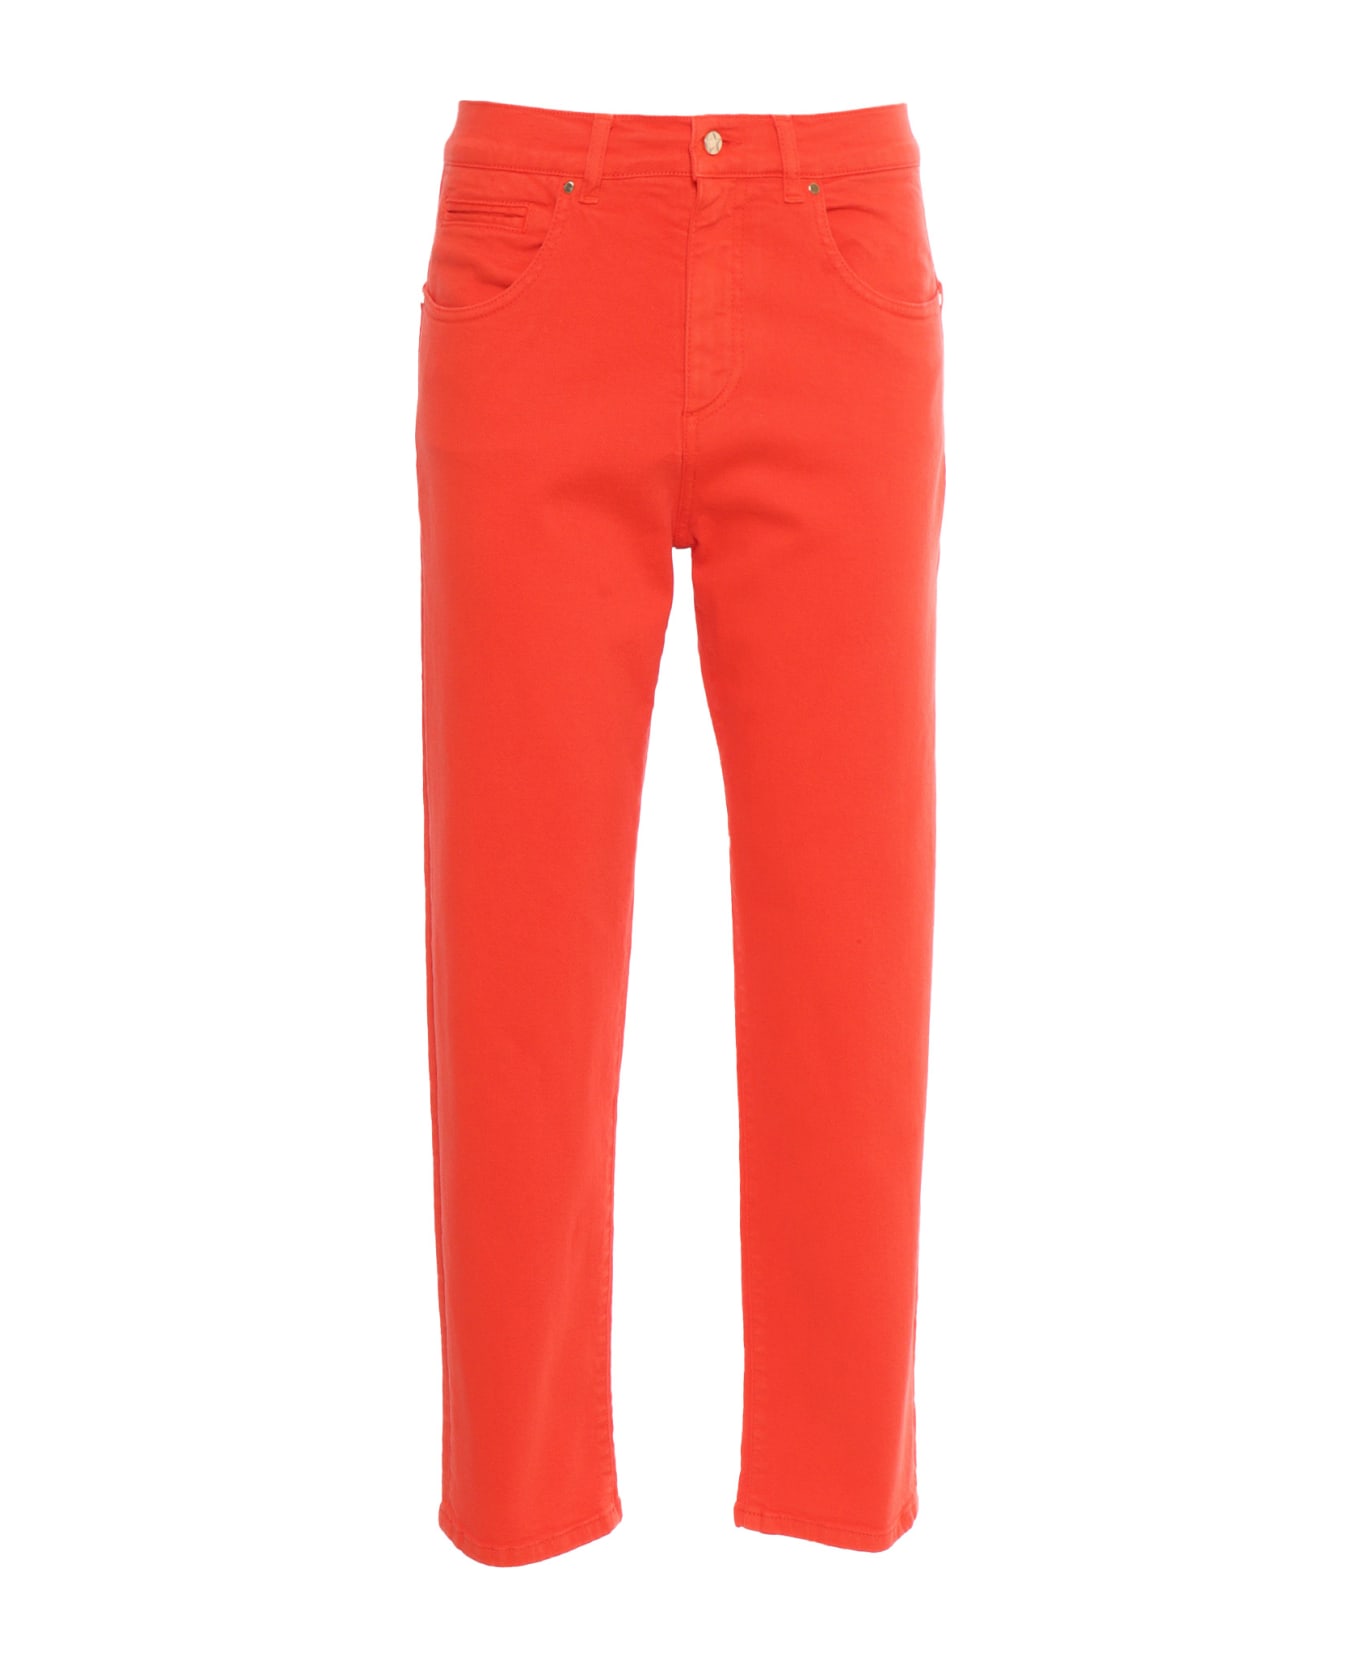 Lorena Antoniazzi Red Trousers - RED